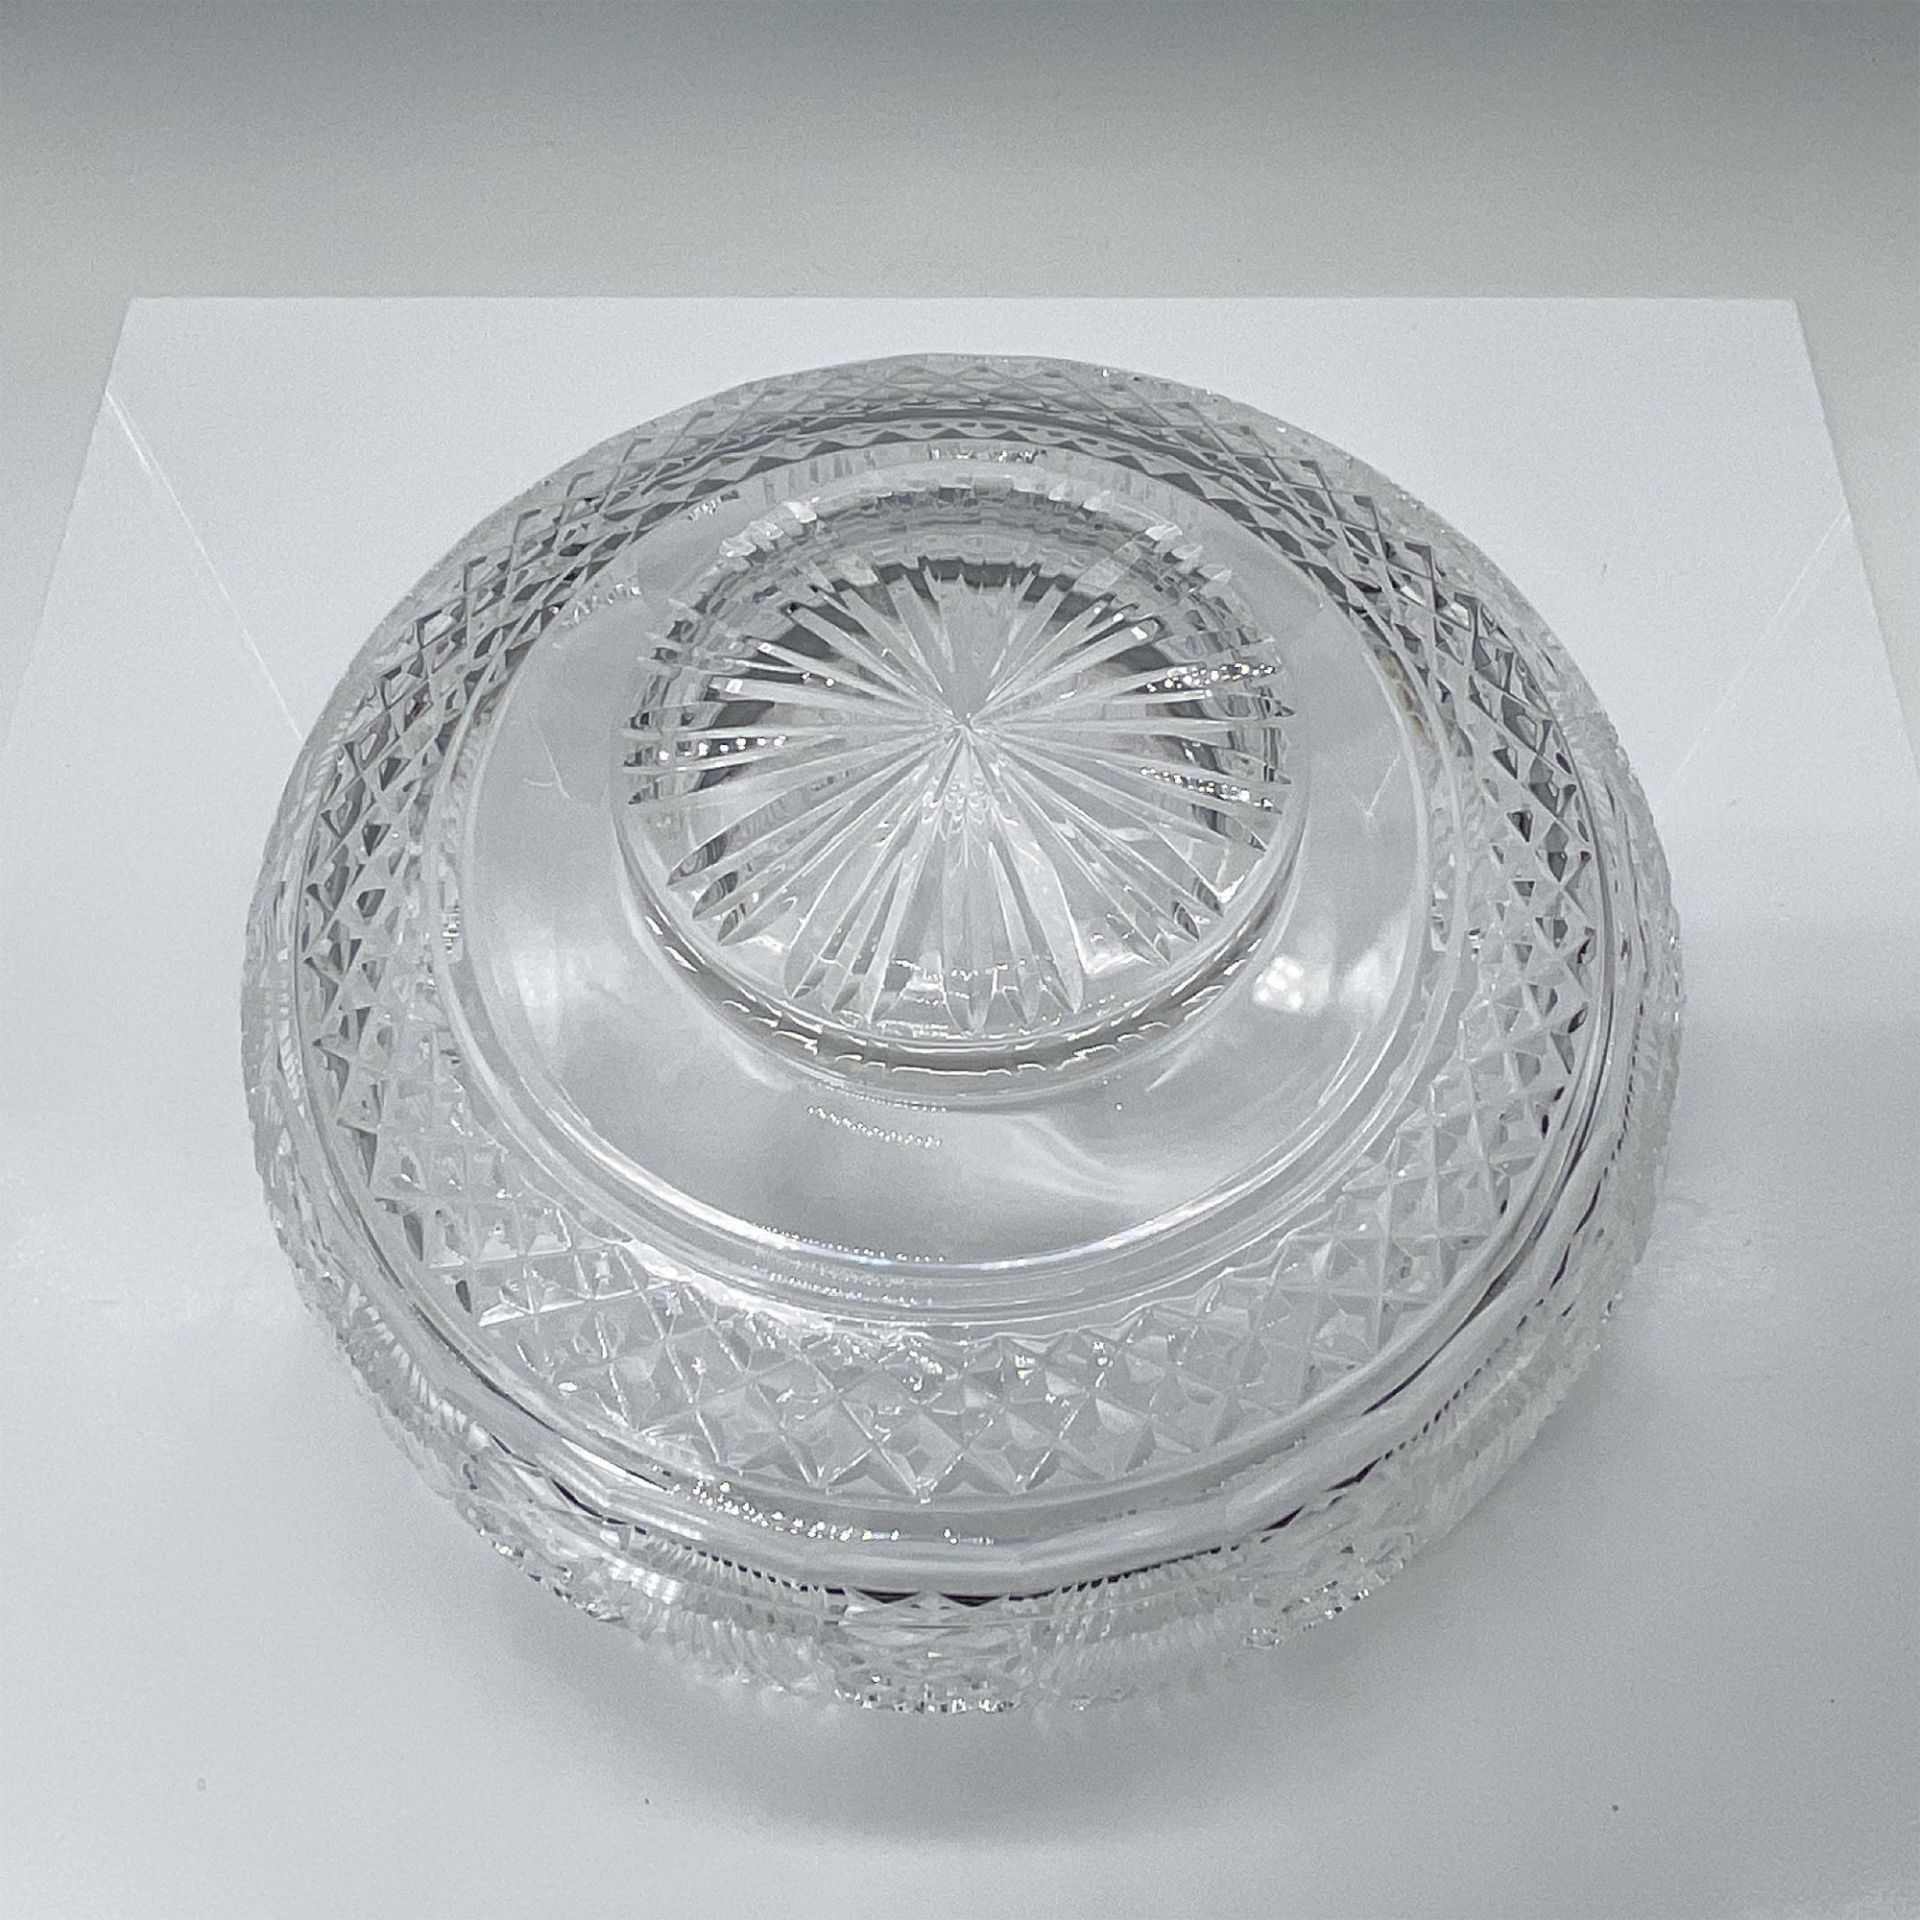 Waterford Crystal Centerpiece Bowl - Image 5 of 5